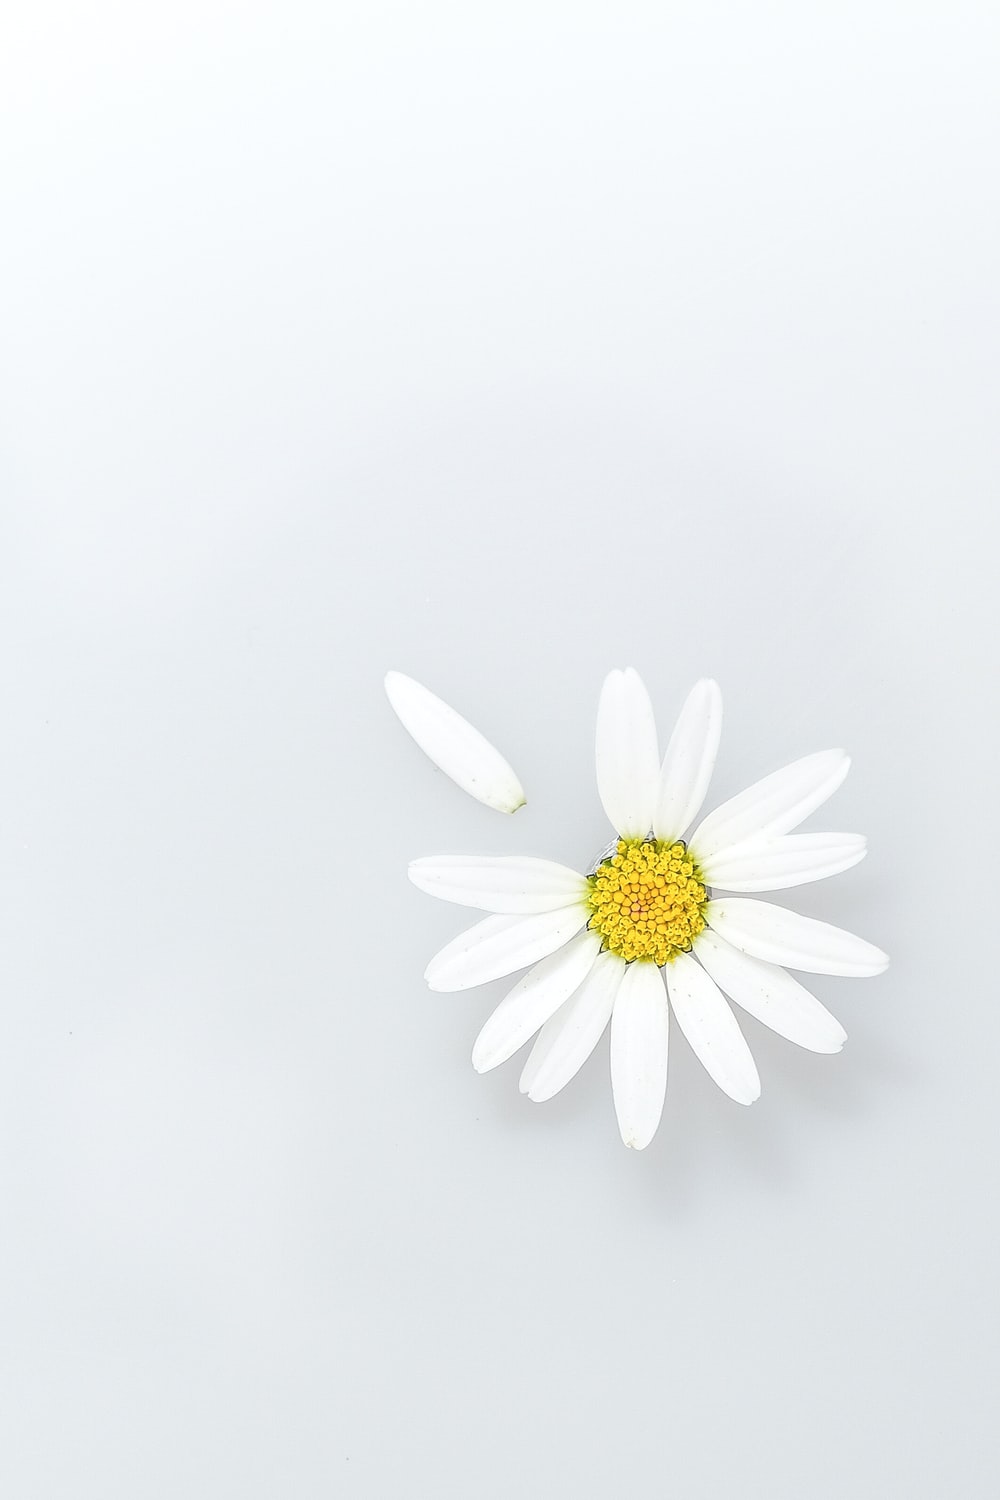 Daisies Wallpapers